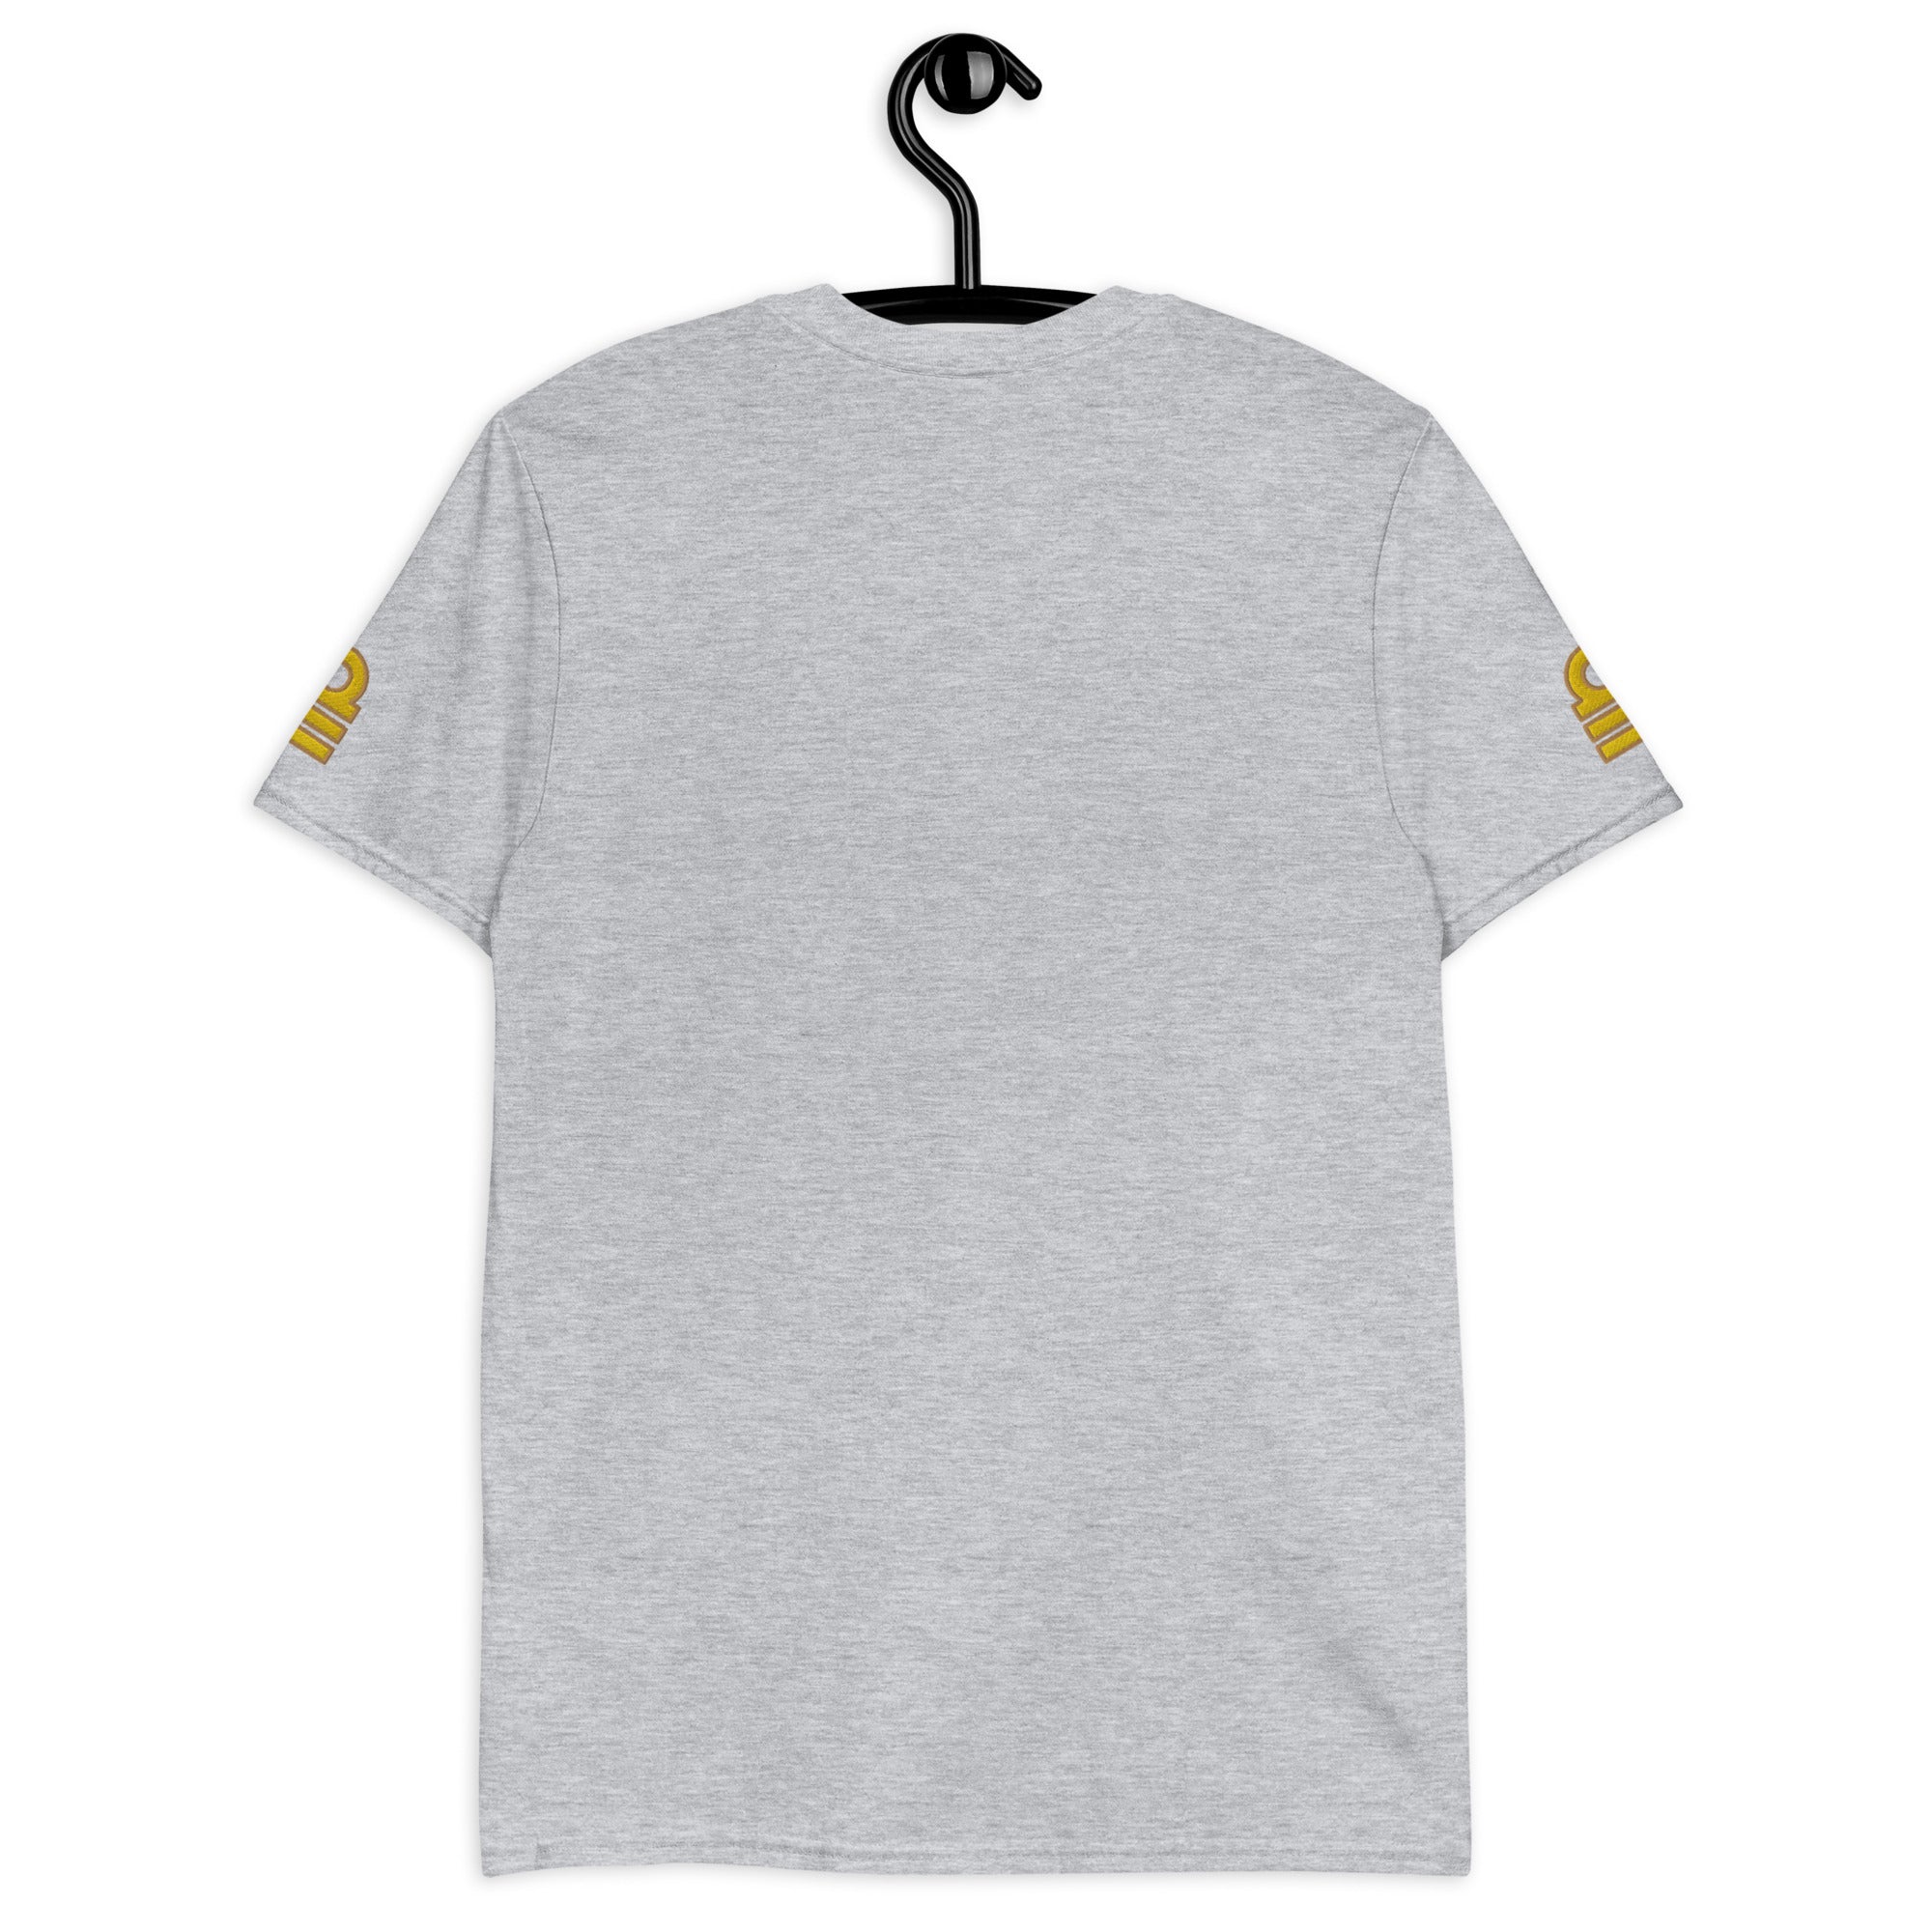 Chief Officer t-shirt with embroidery (Round epaulettes)